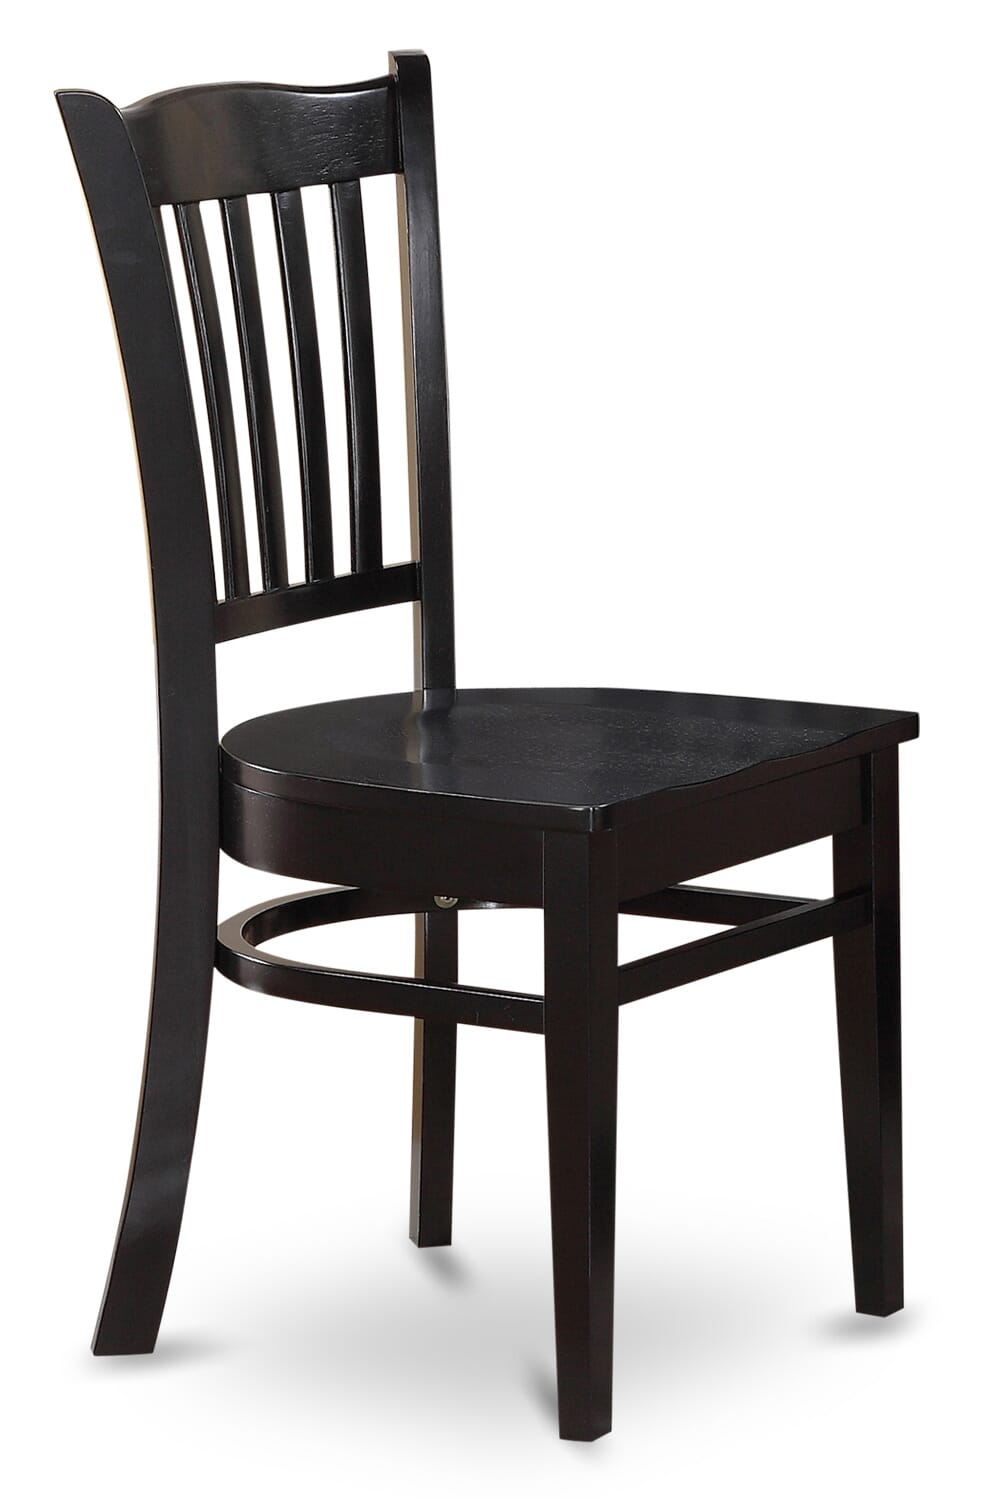 East West Furniture AMGR3-BCH-W 3 Piece Dinette Set for Small Spaces Contains a Round Kitchen Table with Pedestal and 2 Dining Room Chairs, 36x36 Inch, Black & Cherry